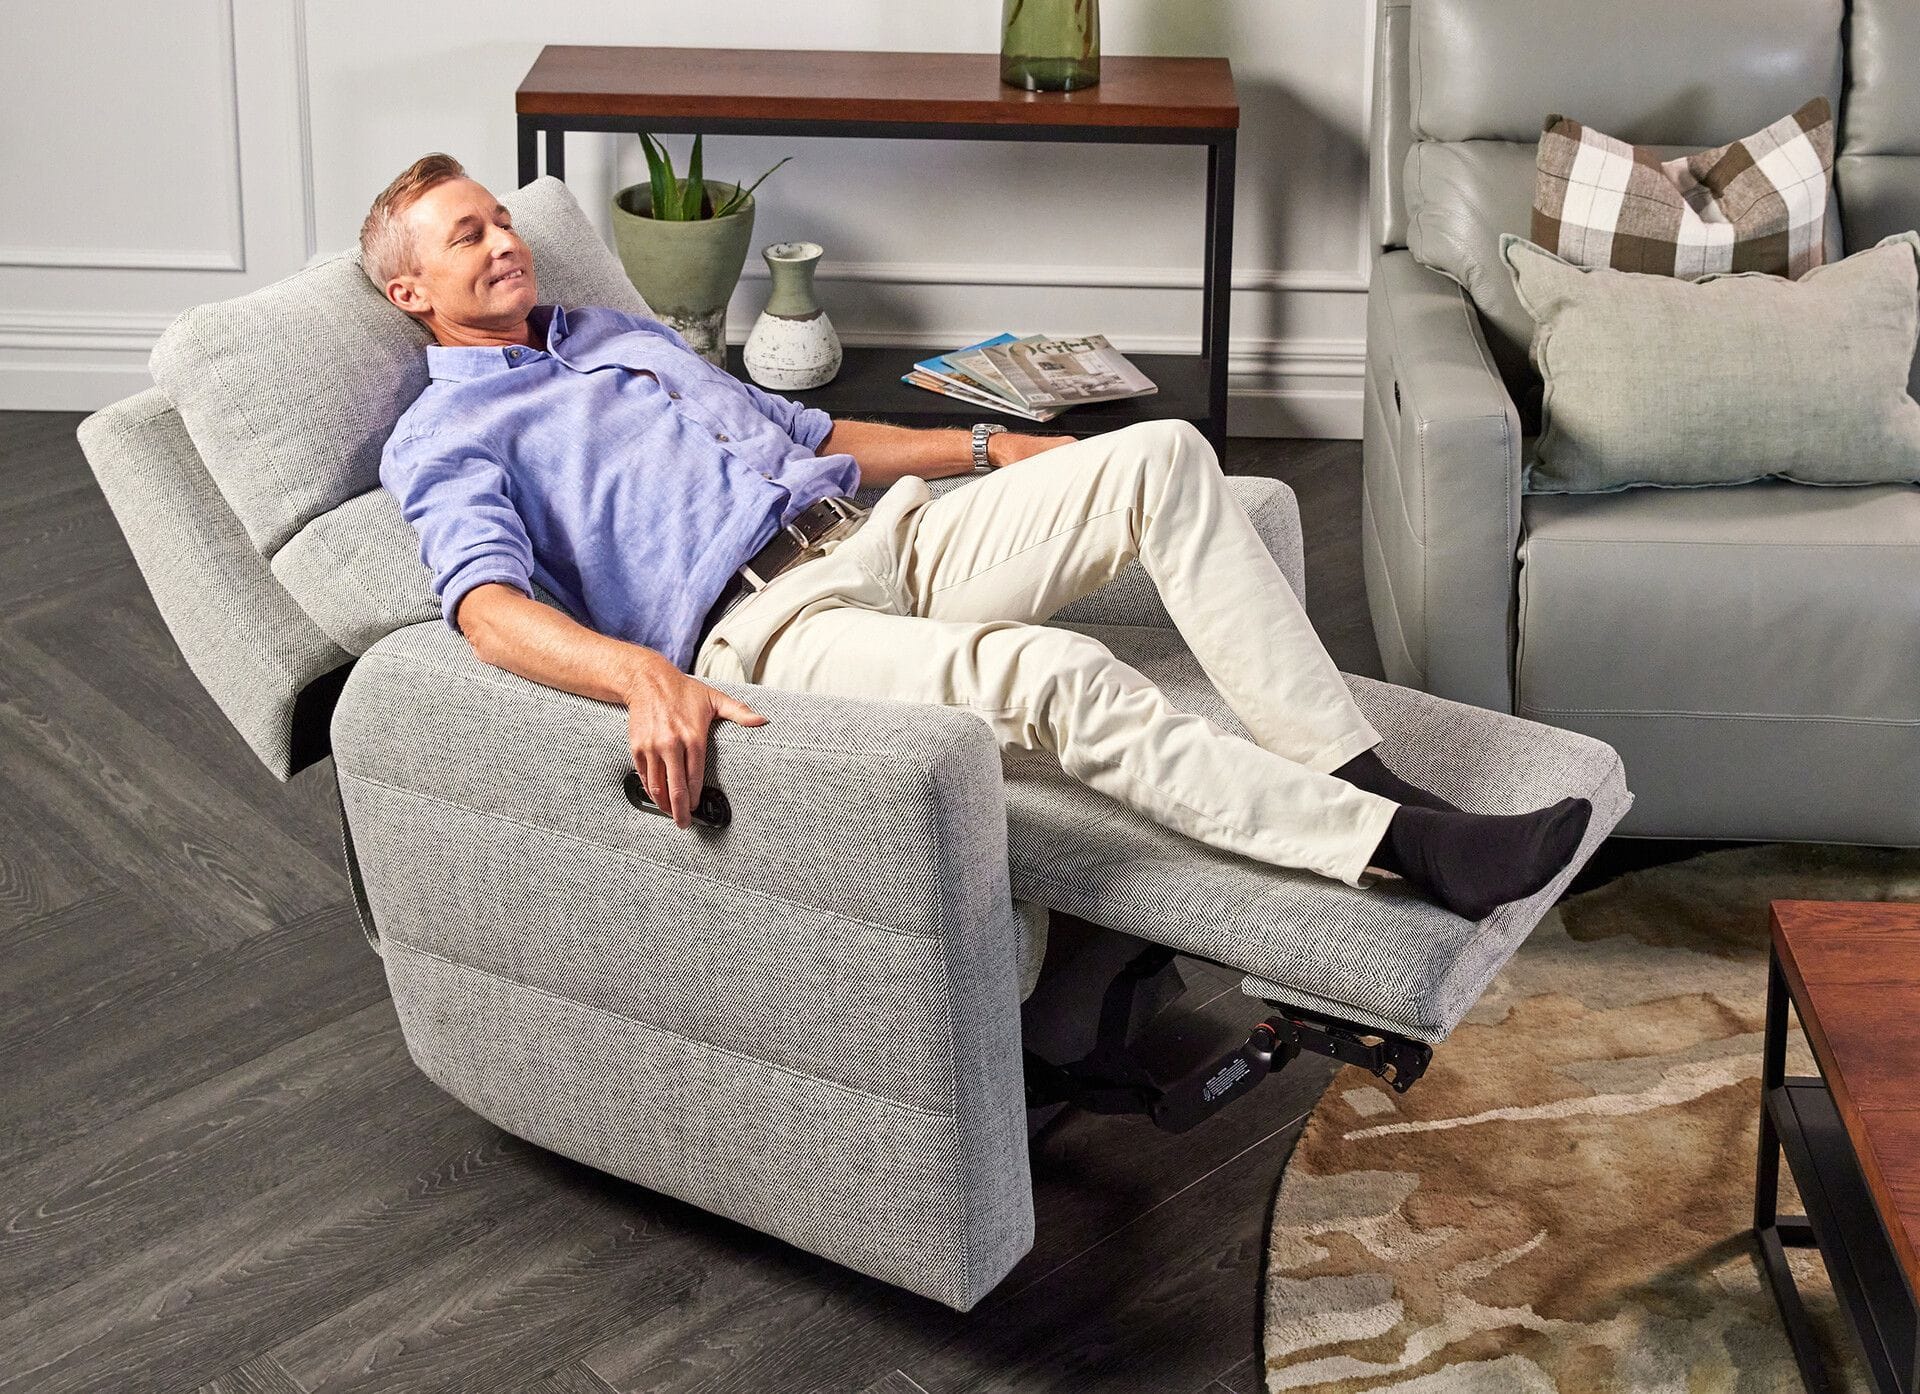 Experiencing back pain after the holidays? Here’s how to pick the best recliners for relief